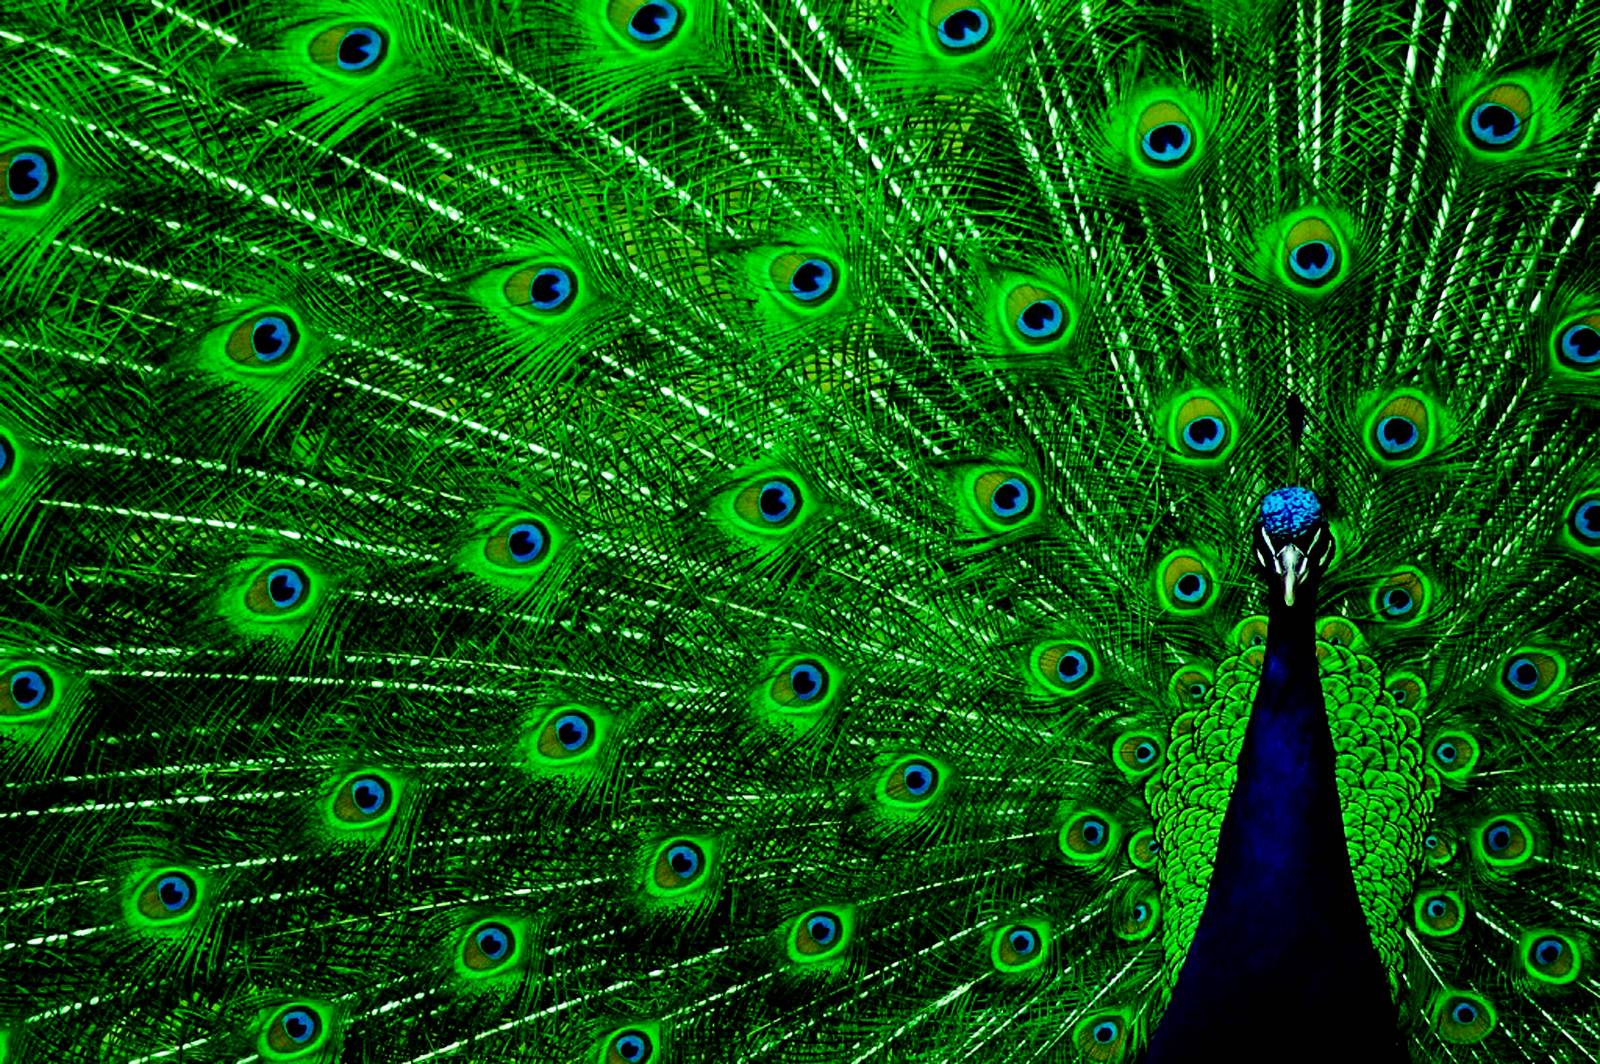 Wallpapers Of Peacock Feathers Hd 2015 Wallpaper Cave HD Wallpapers Download Free Images Wallpaper [wallpaper981.blogspot.com]